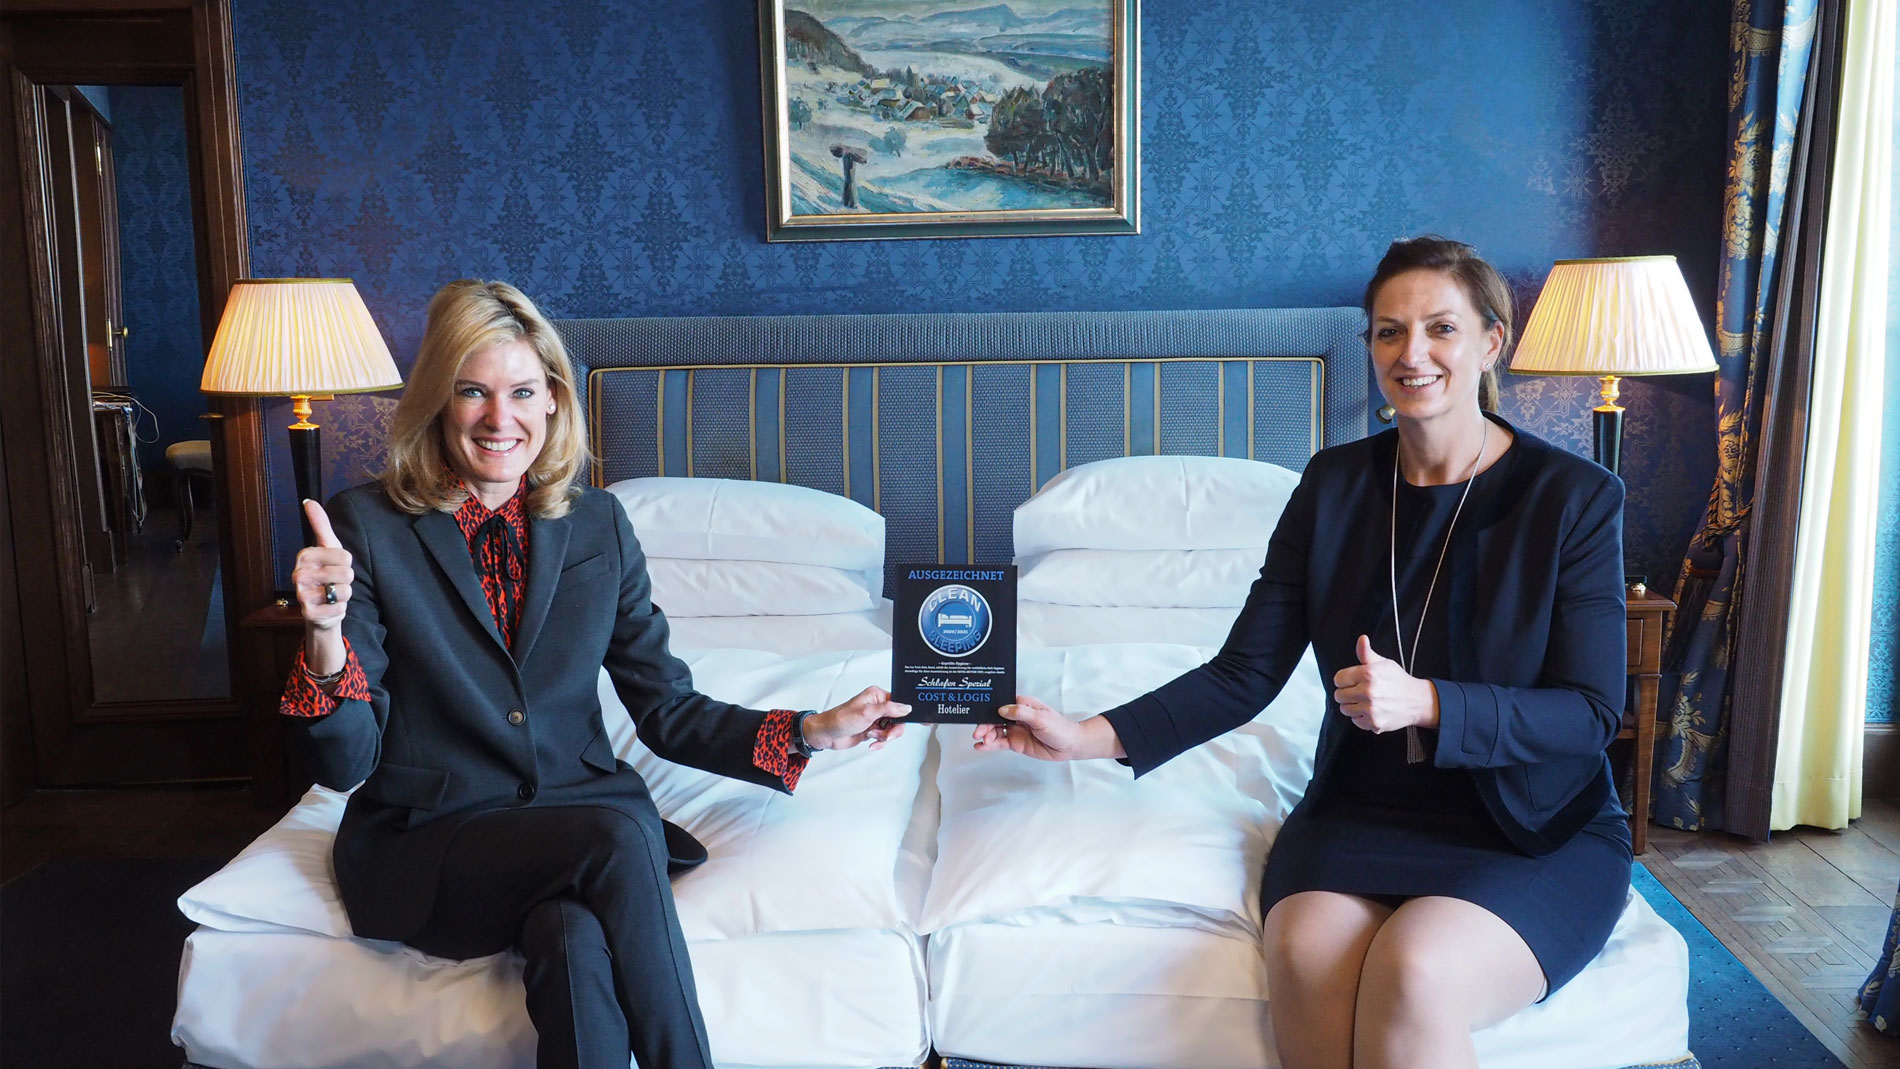 General Manager Tanja Wegmann and Executive Housekeeper Sandra Staats from Les Trois Rois in Basel, the first hotel in Switzerland to receive the CLEAN-SLEEPING-AWARD.